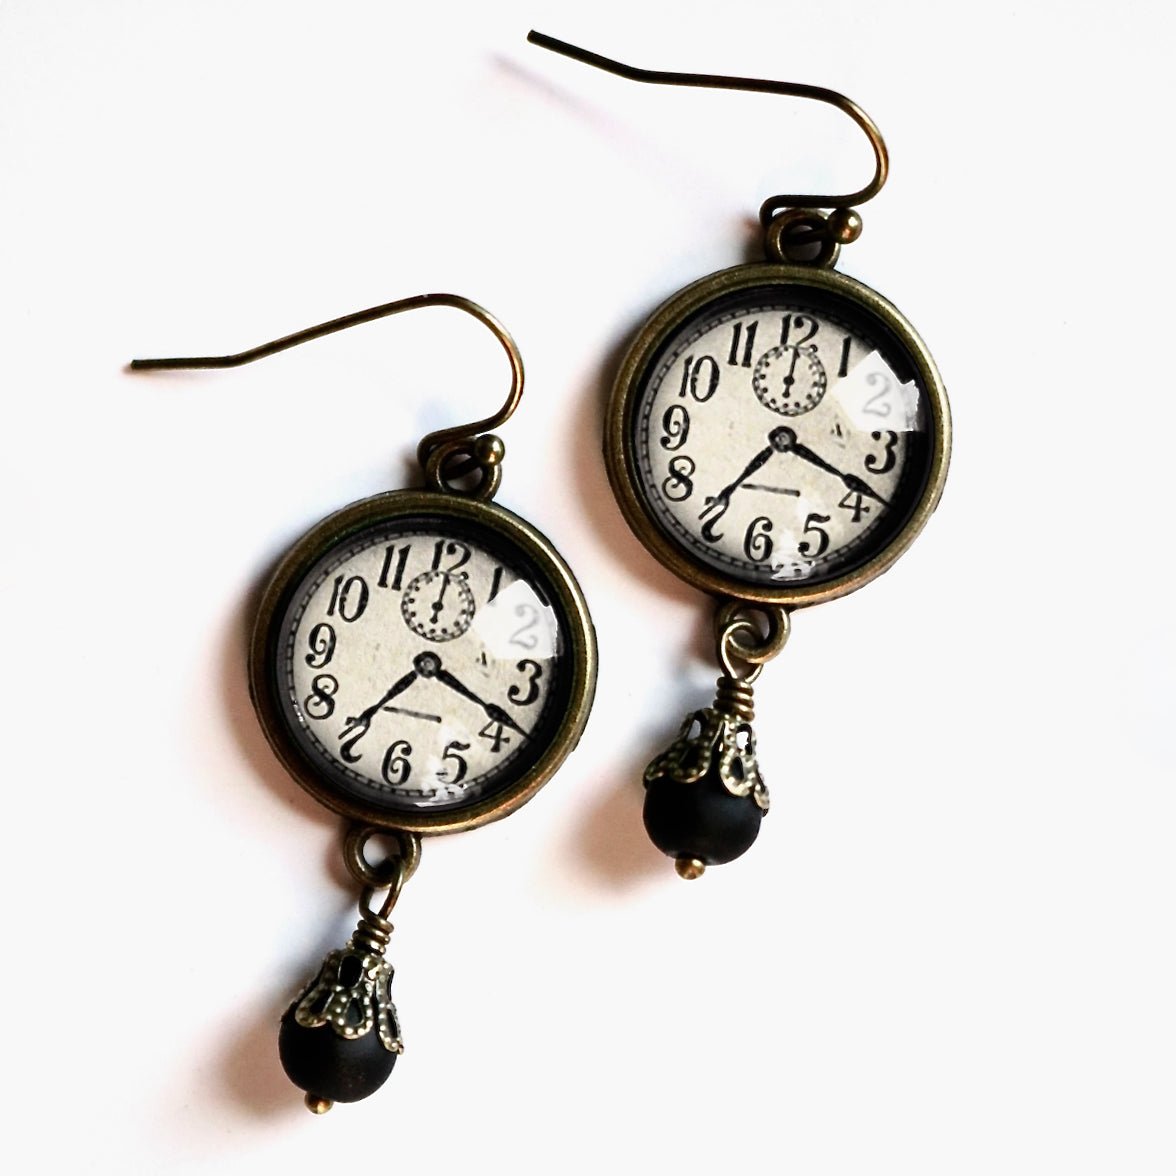 Vintage-Style Cottage Core Edwardian Clock Face Earrings for Pierced Ears - Marmalade Mercantile